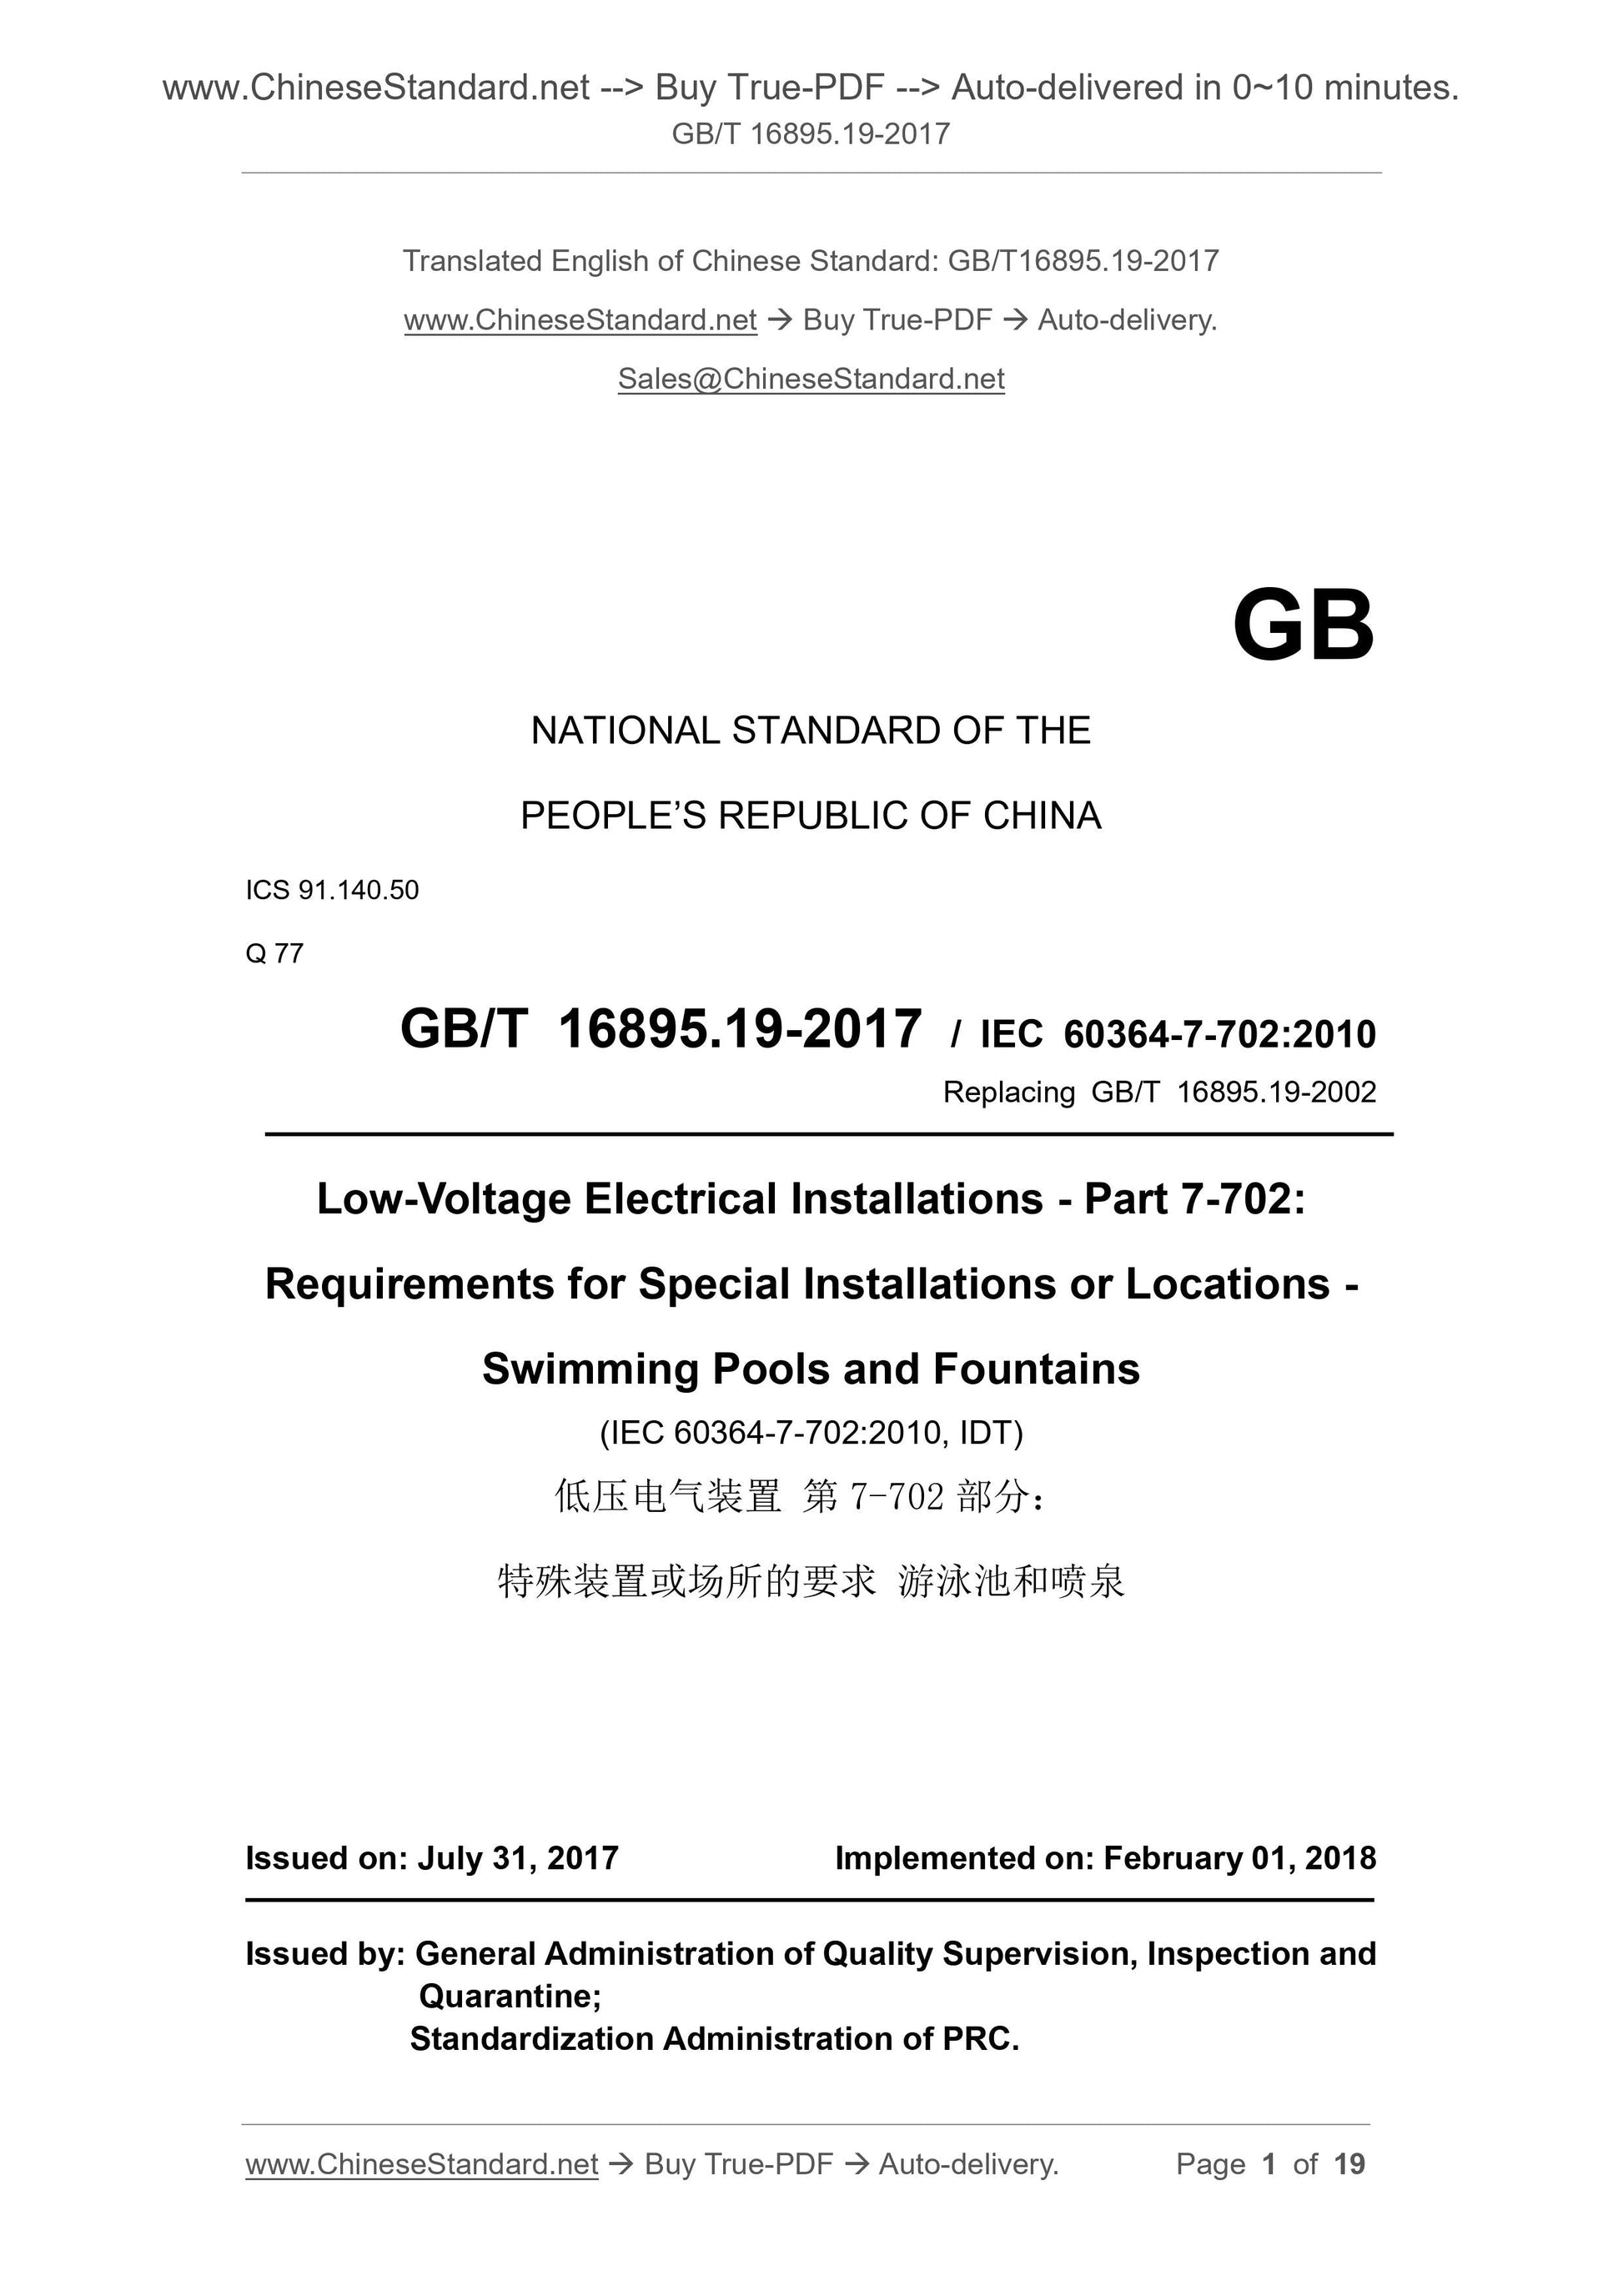 GB/T 16895.19-2017 Page 1